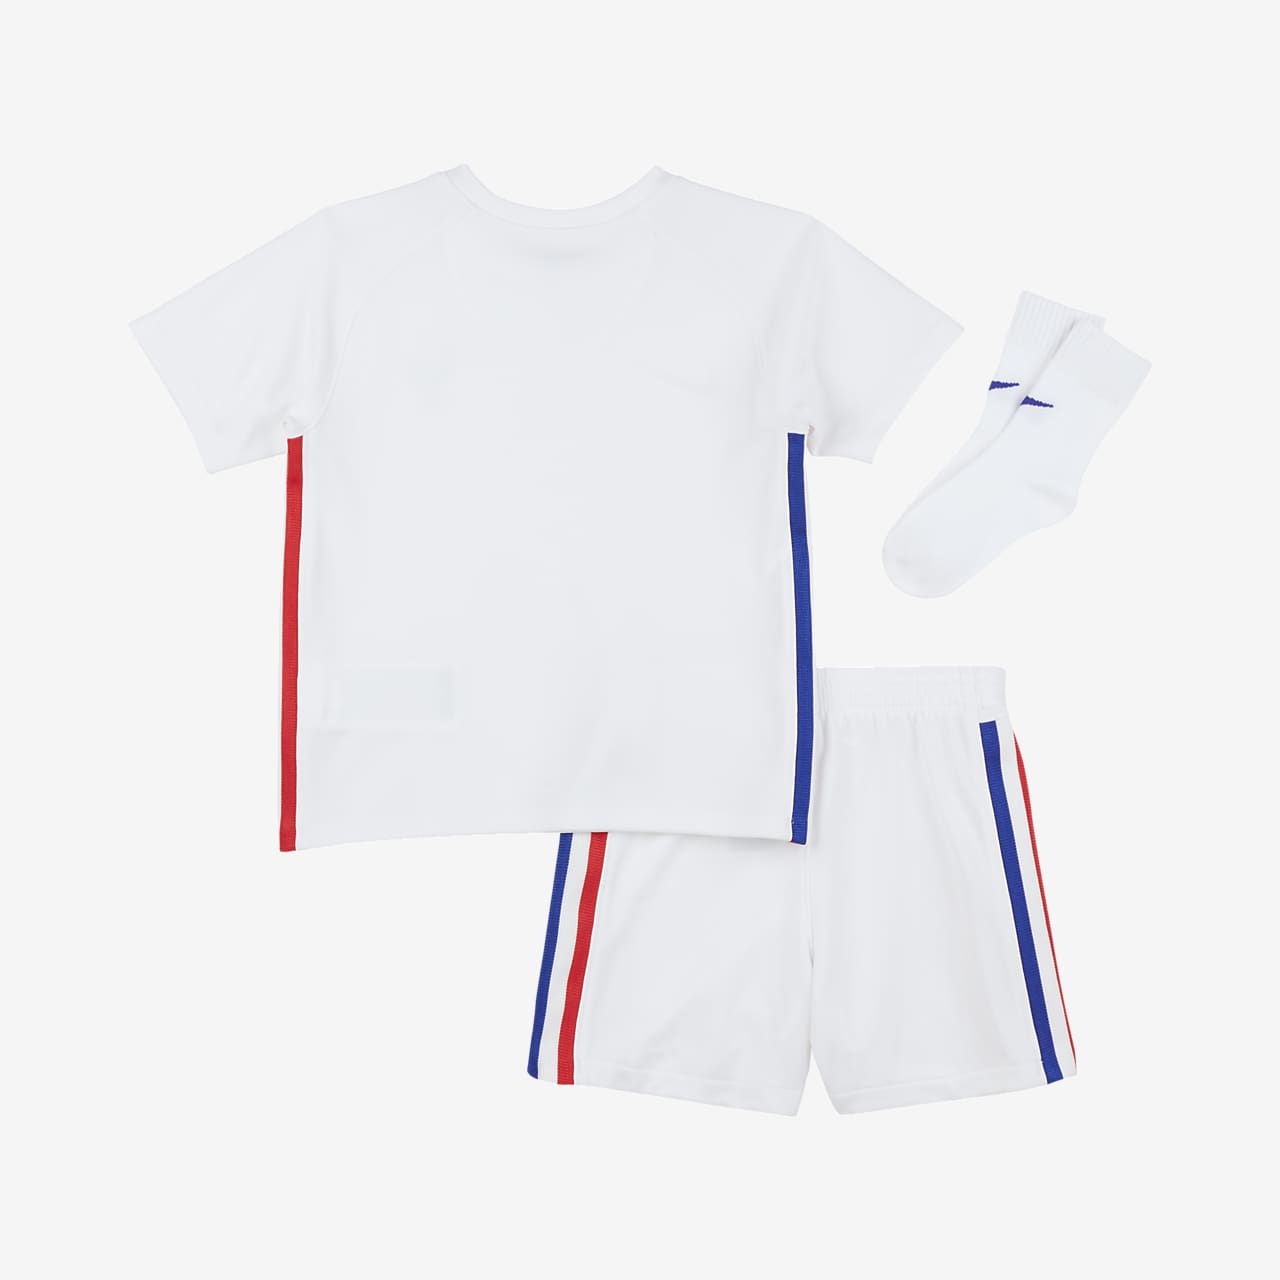 FFF 2020 Away Baby and Toddler Football Kit. Nike MA